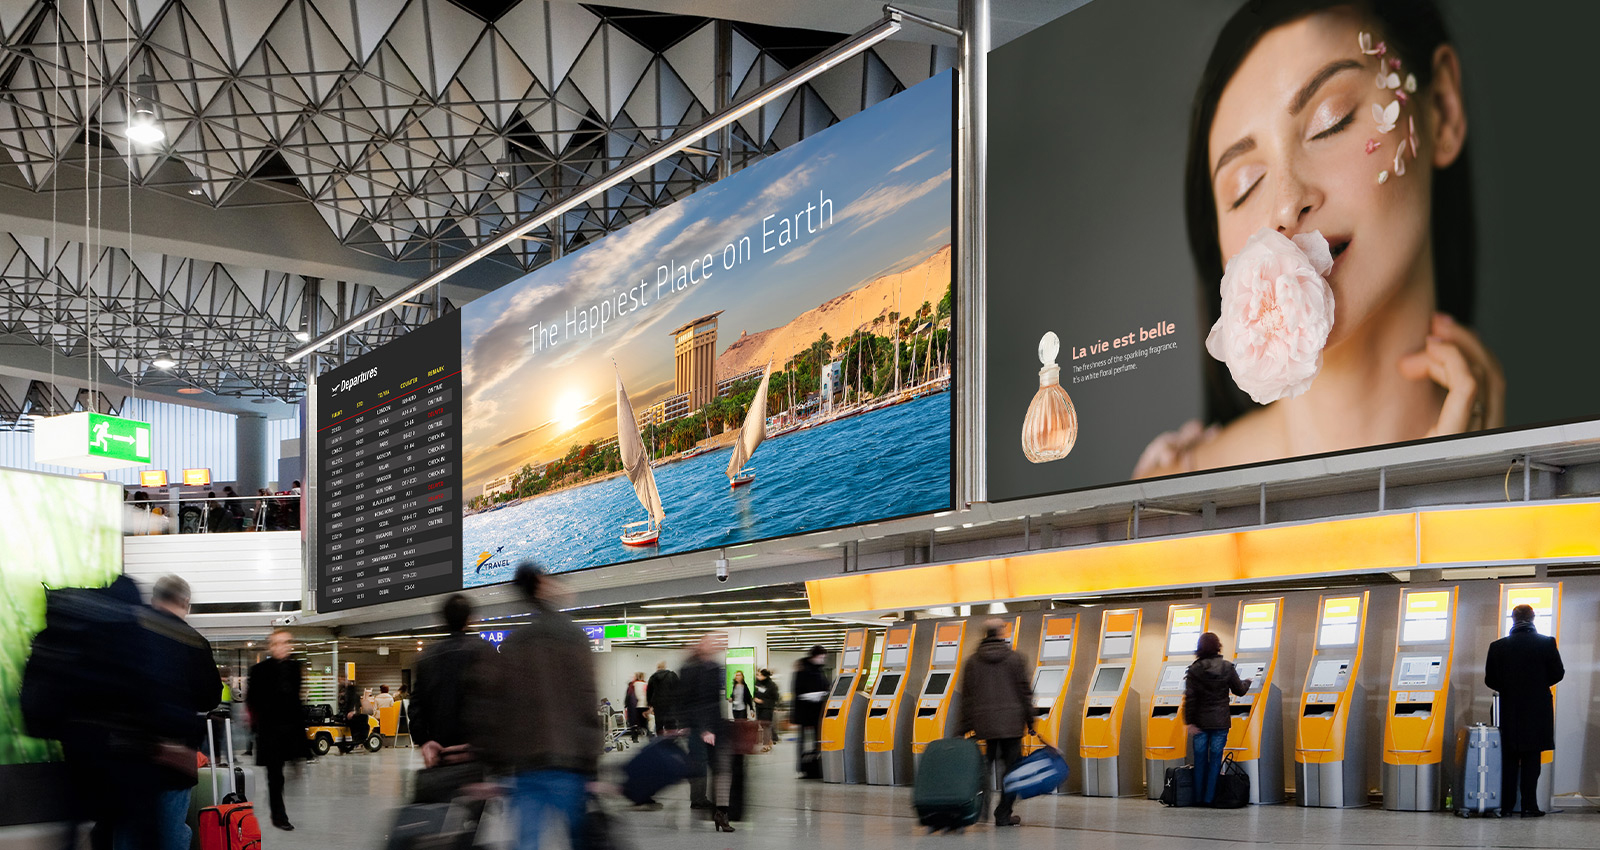 Large LEDs inside an airport show passengers’ departure schedules and advertisements.